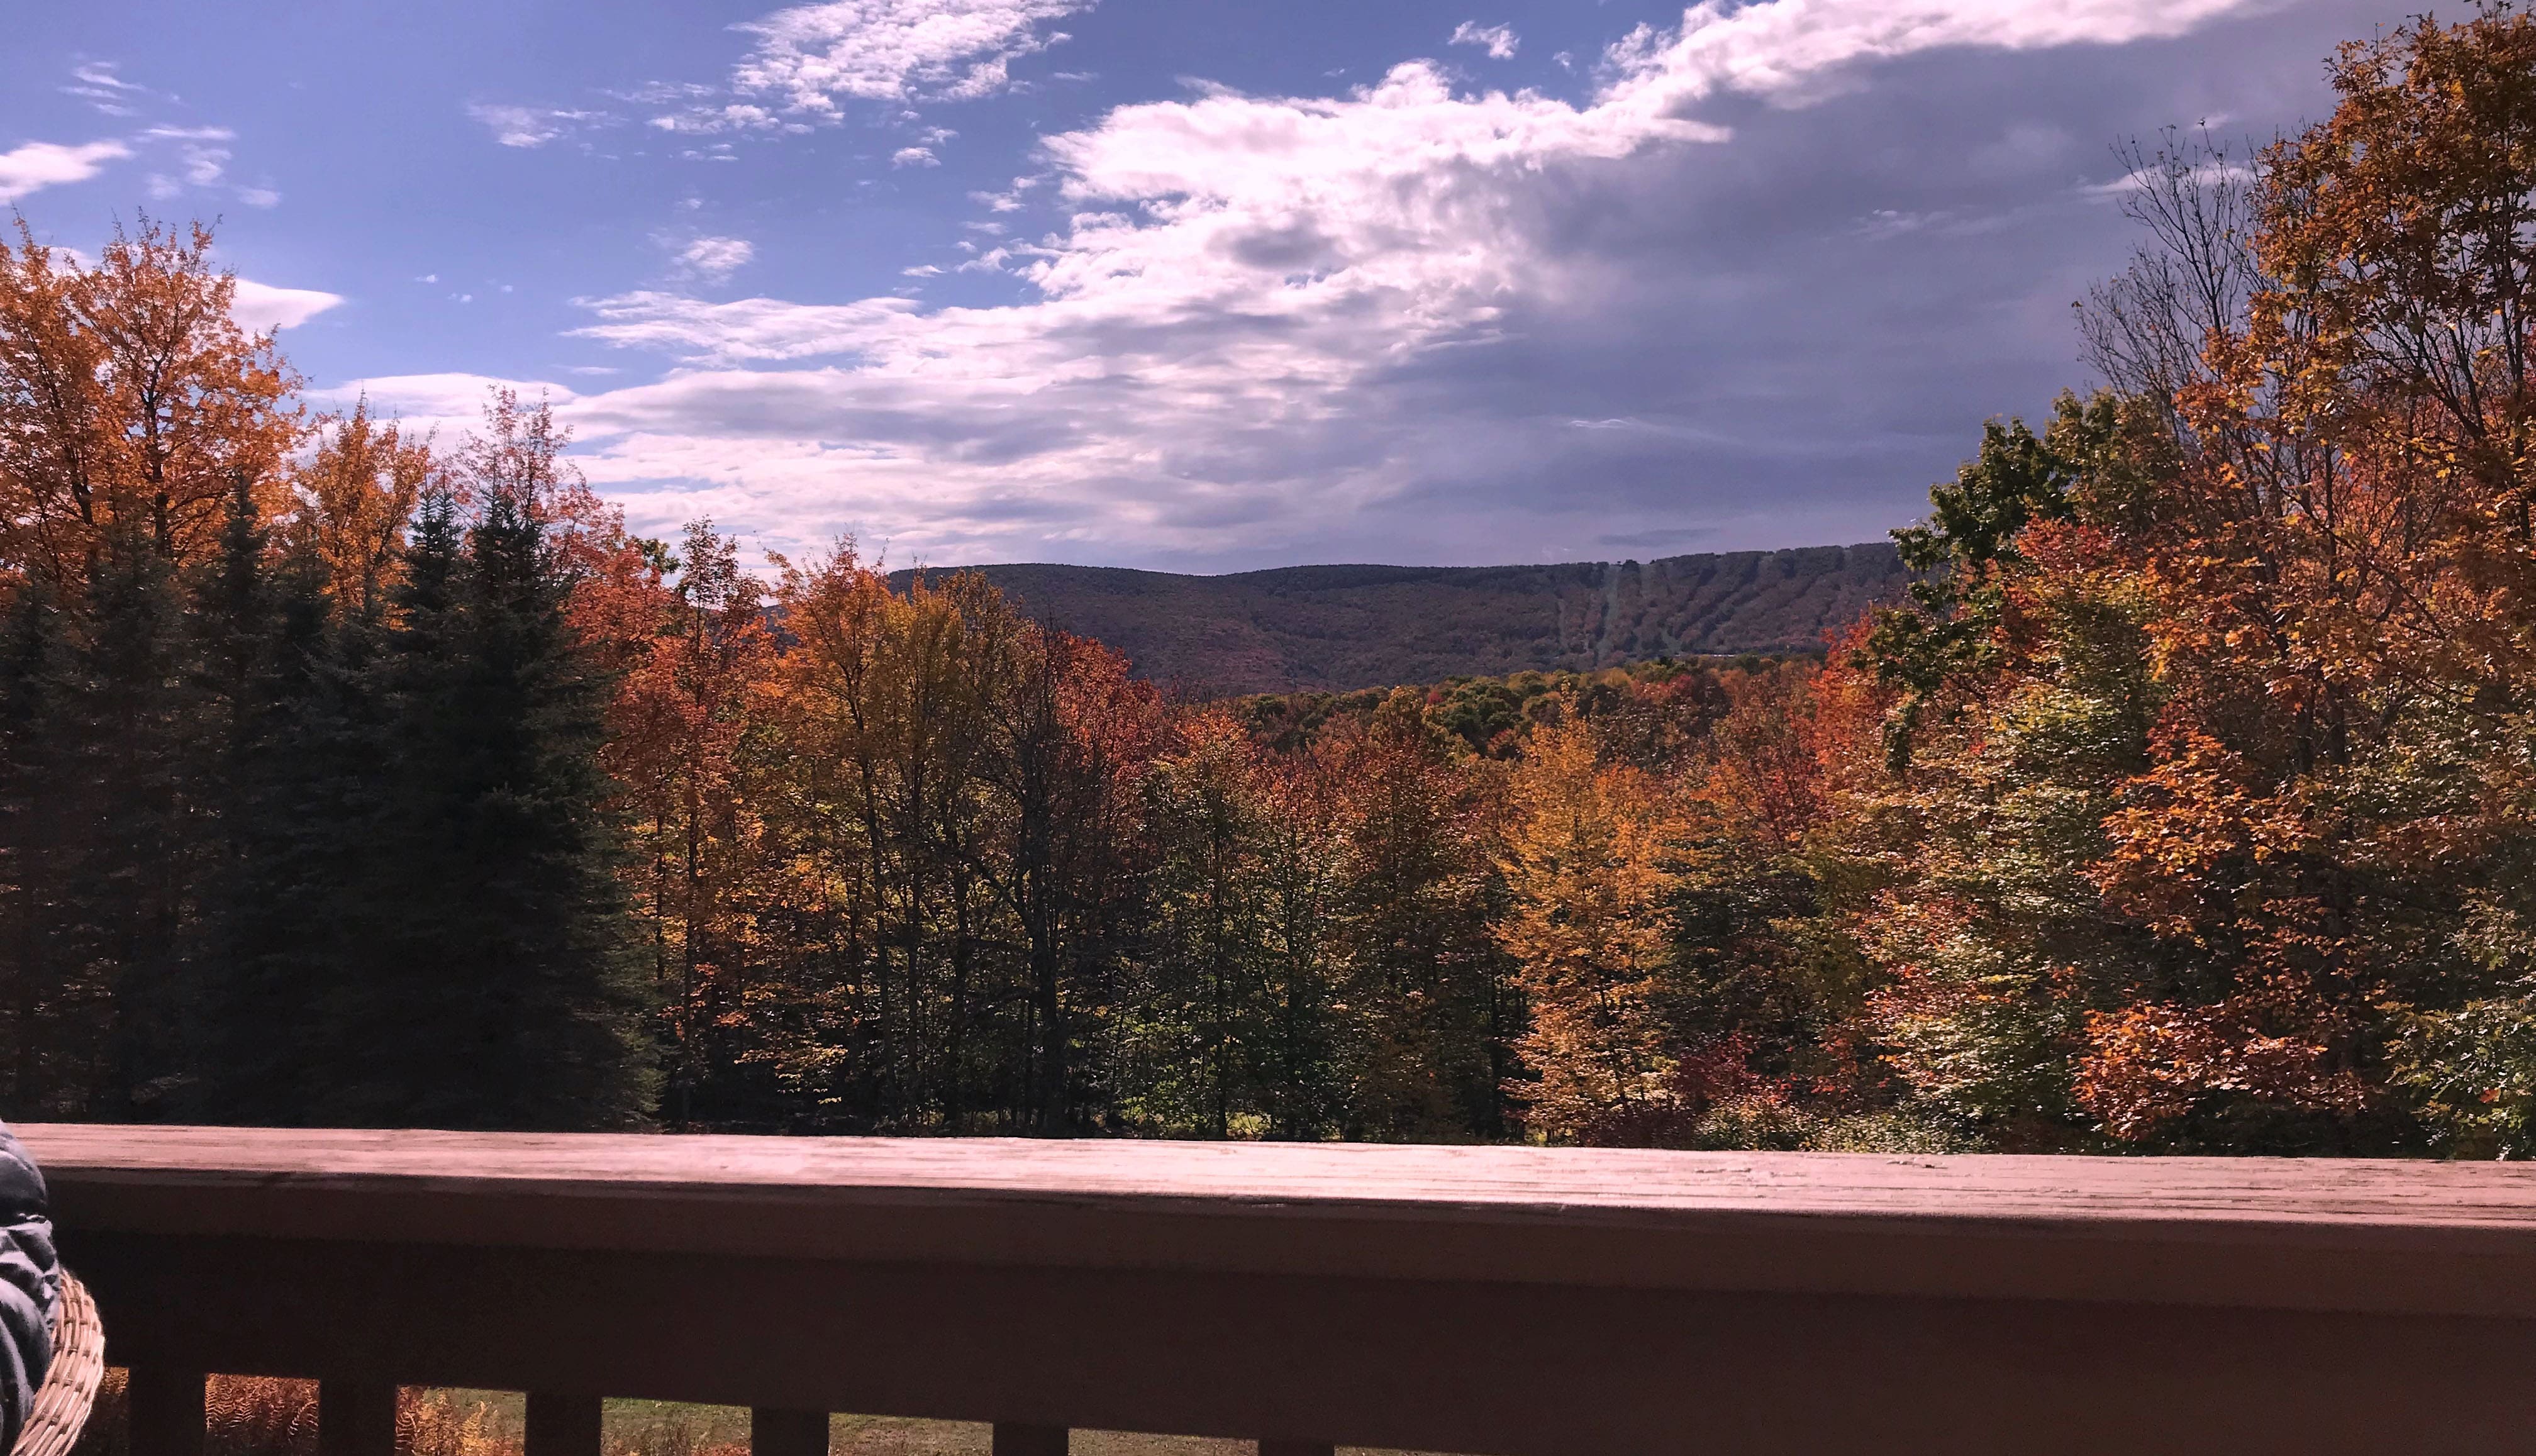 Amazing Autumn Views from the deck!